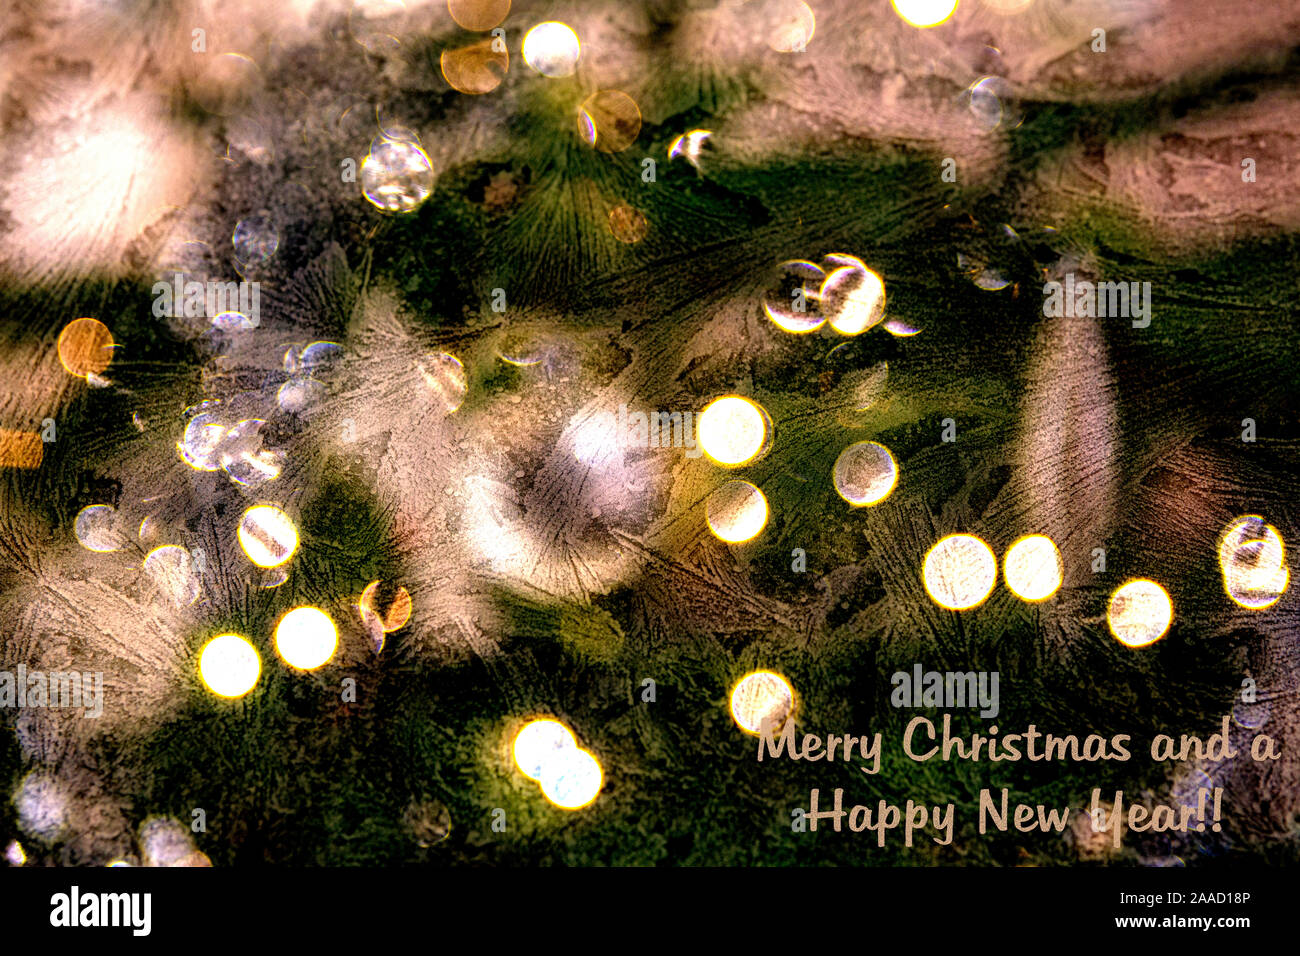 Merry Christmas and Happy New Year background with Ice, baubles and lights Stock Photo